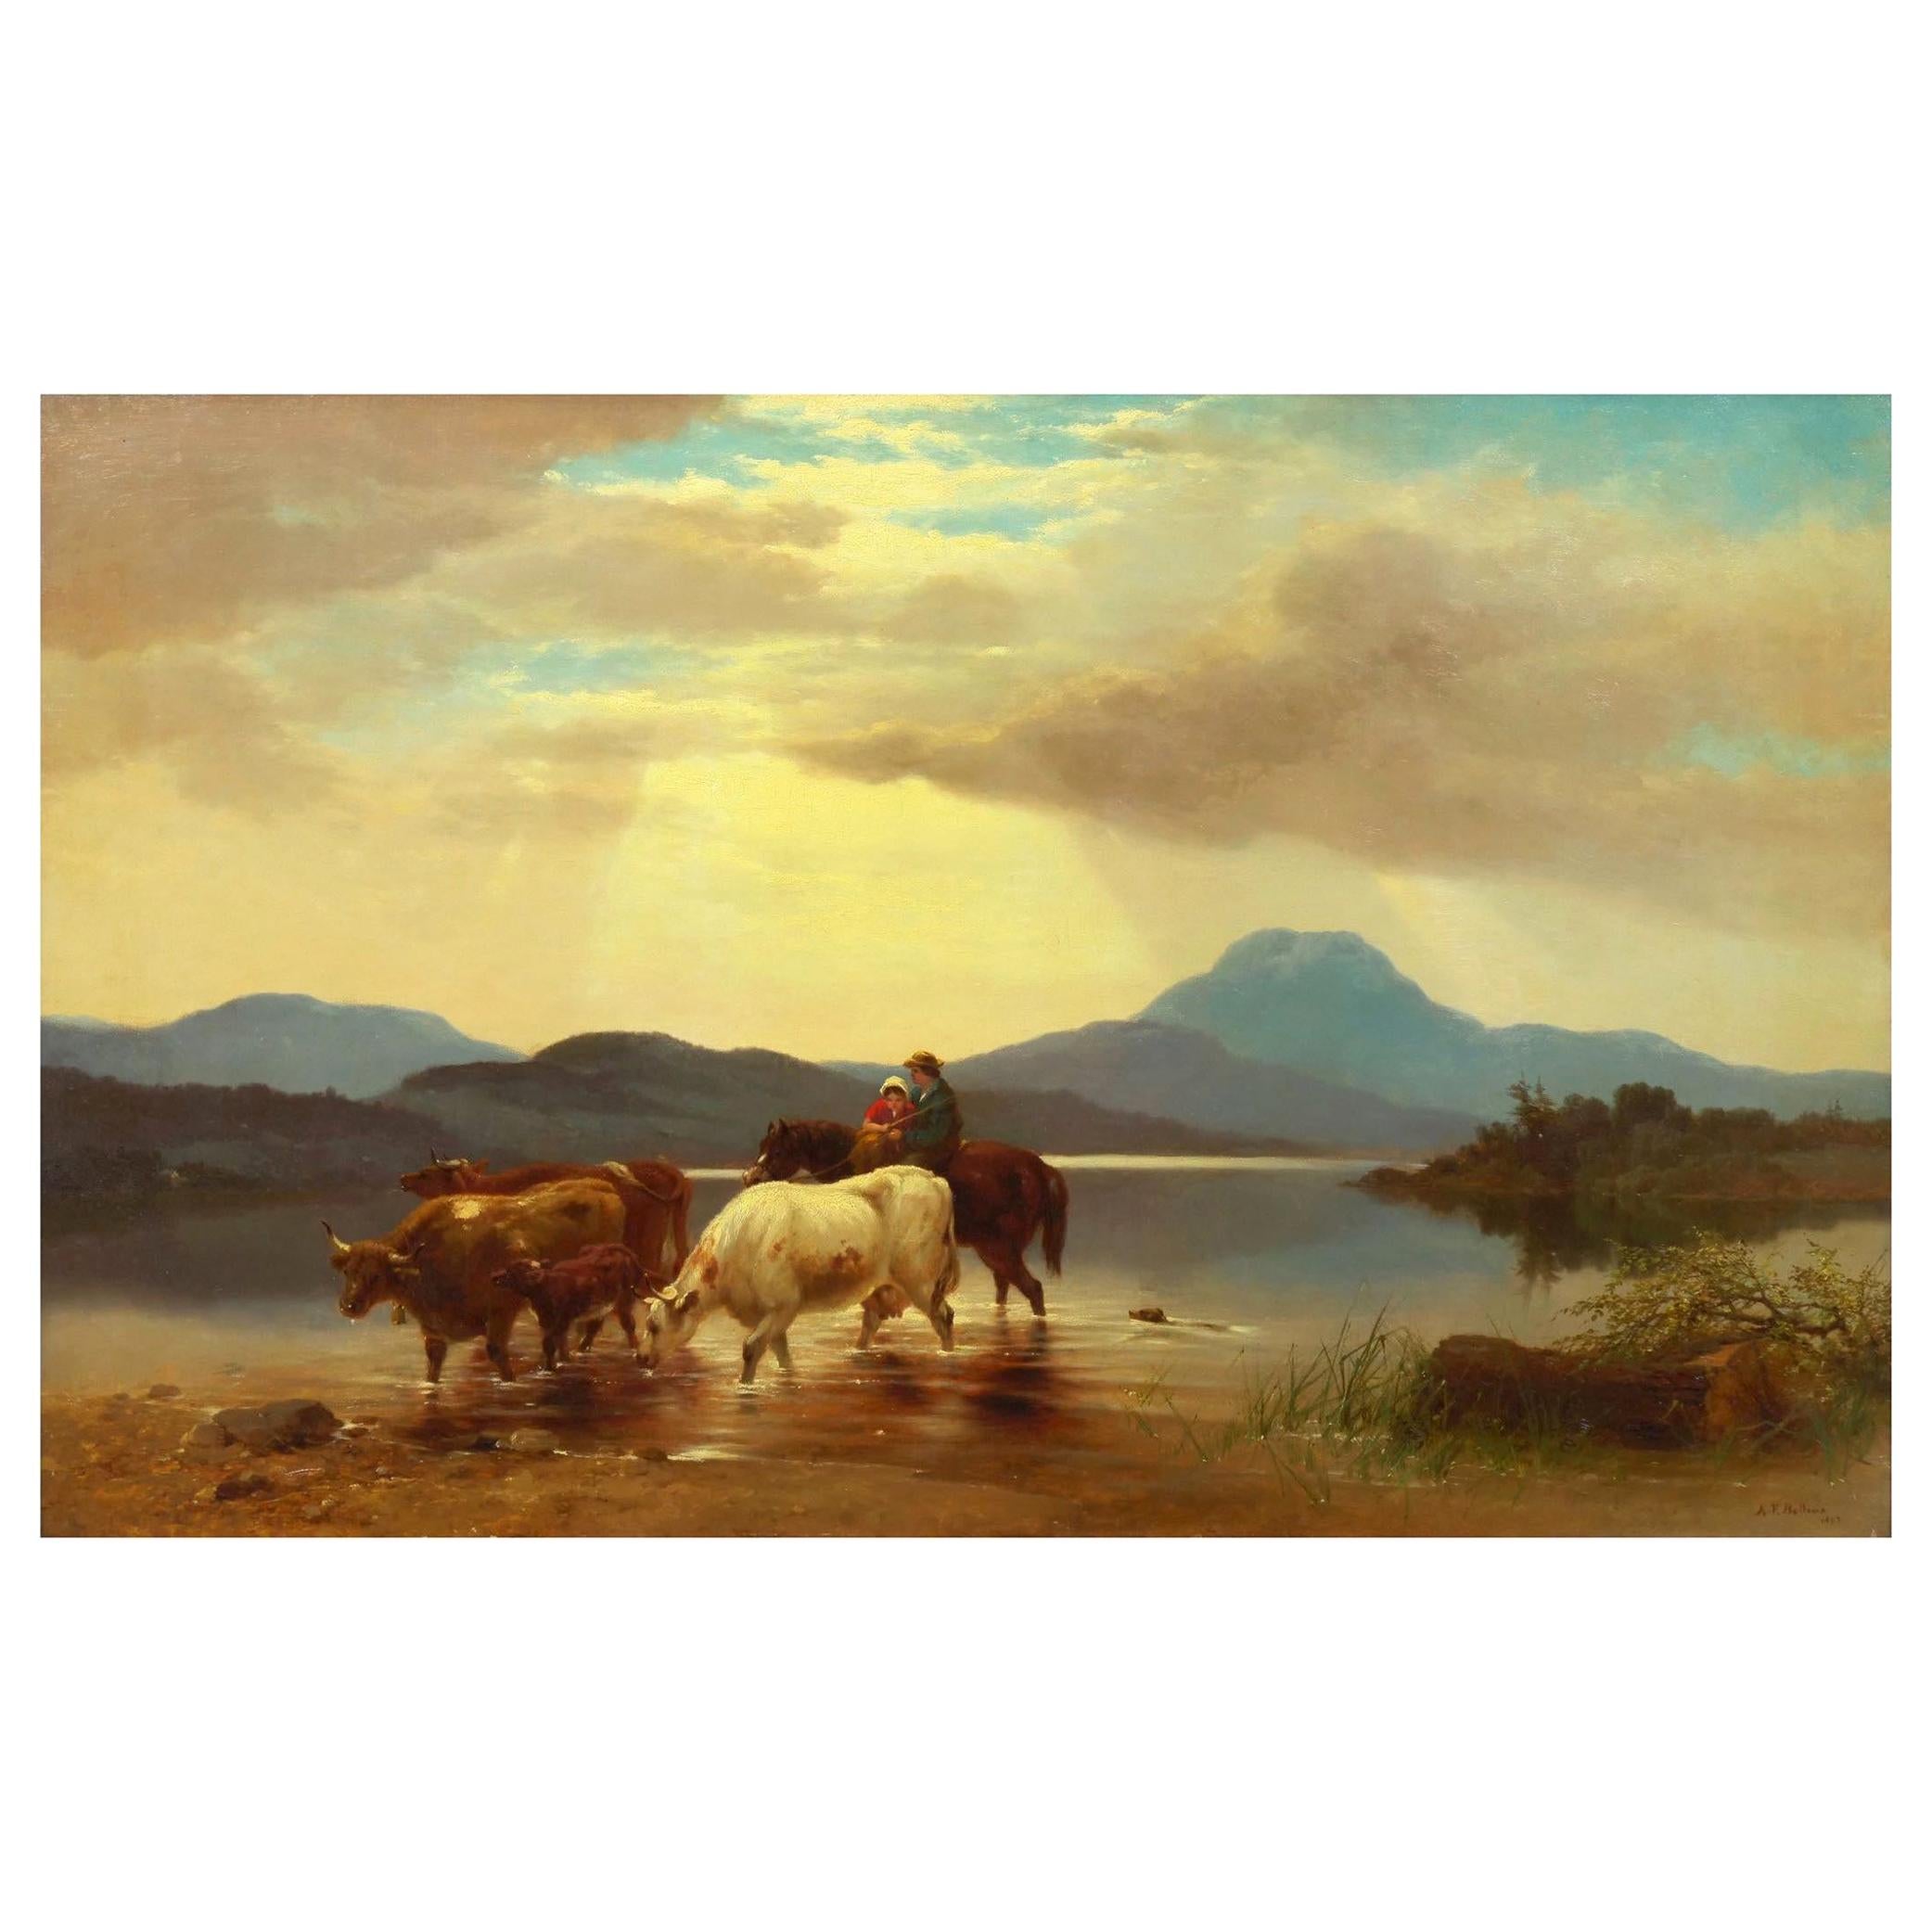 "Homeward Bound" '1863' American Landscape Painting by Albert Fitch Bellows